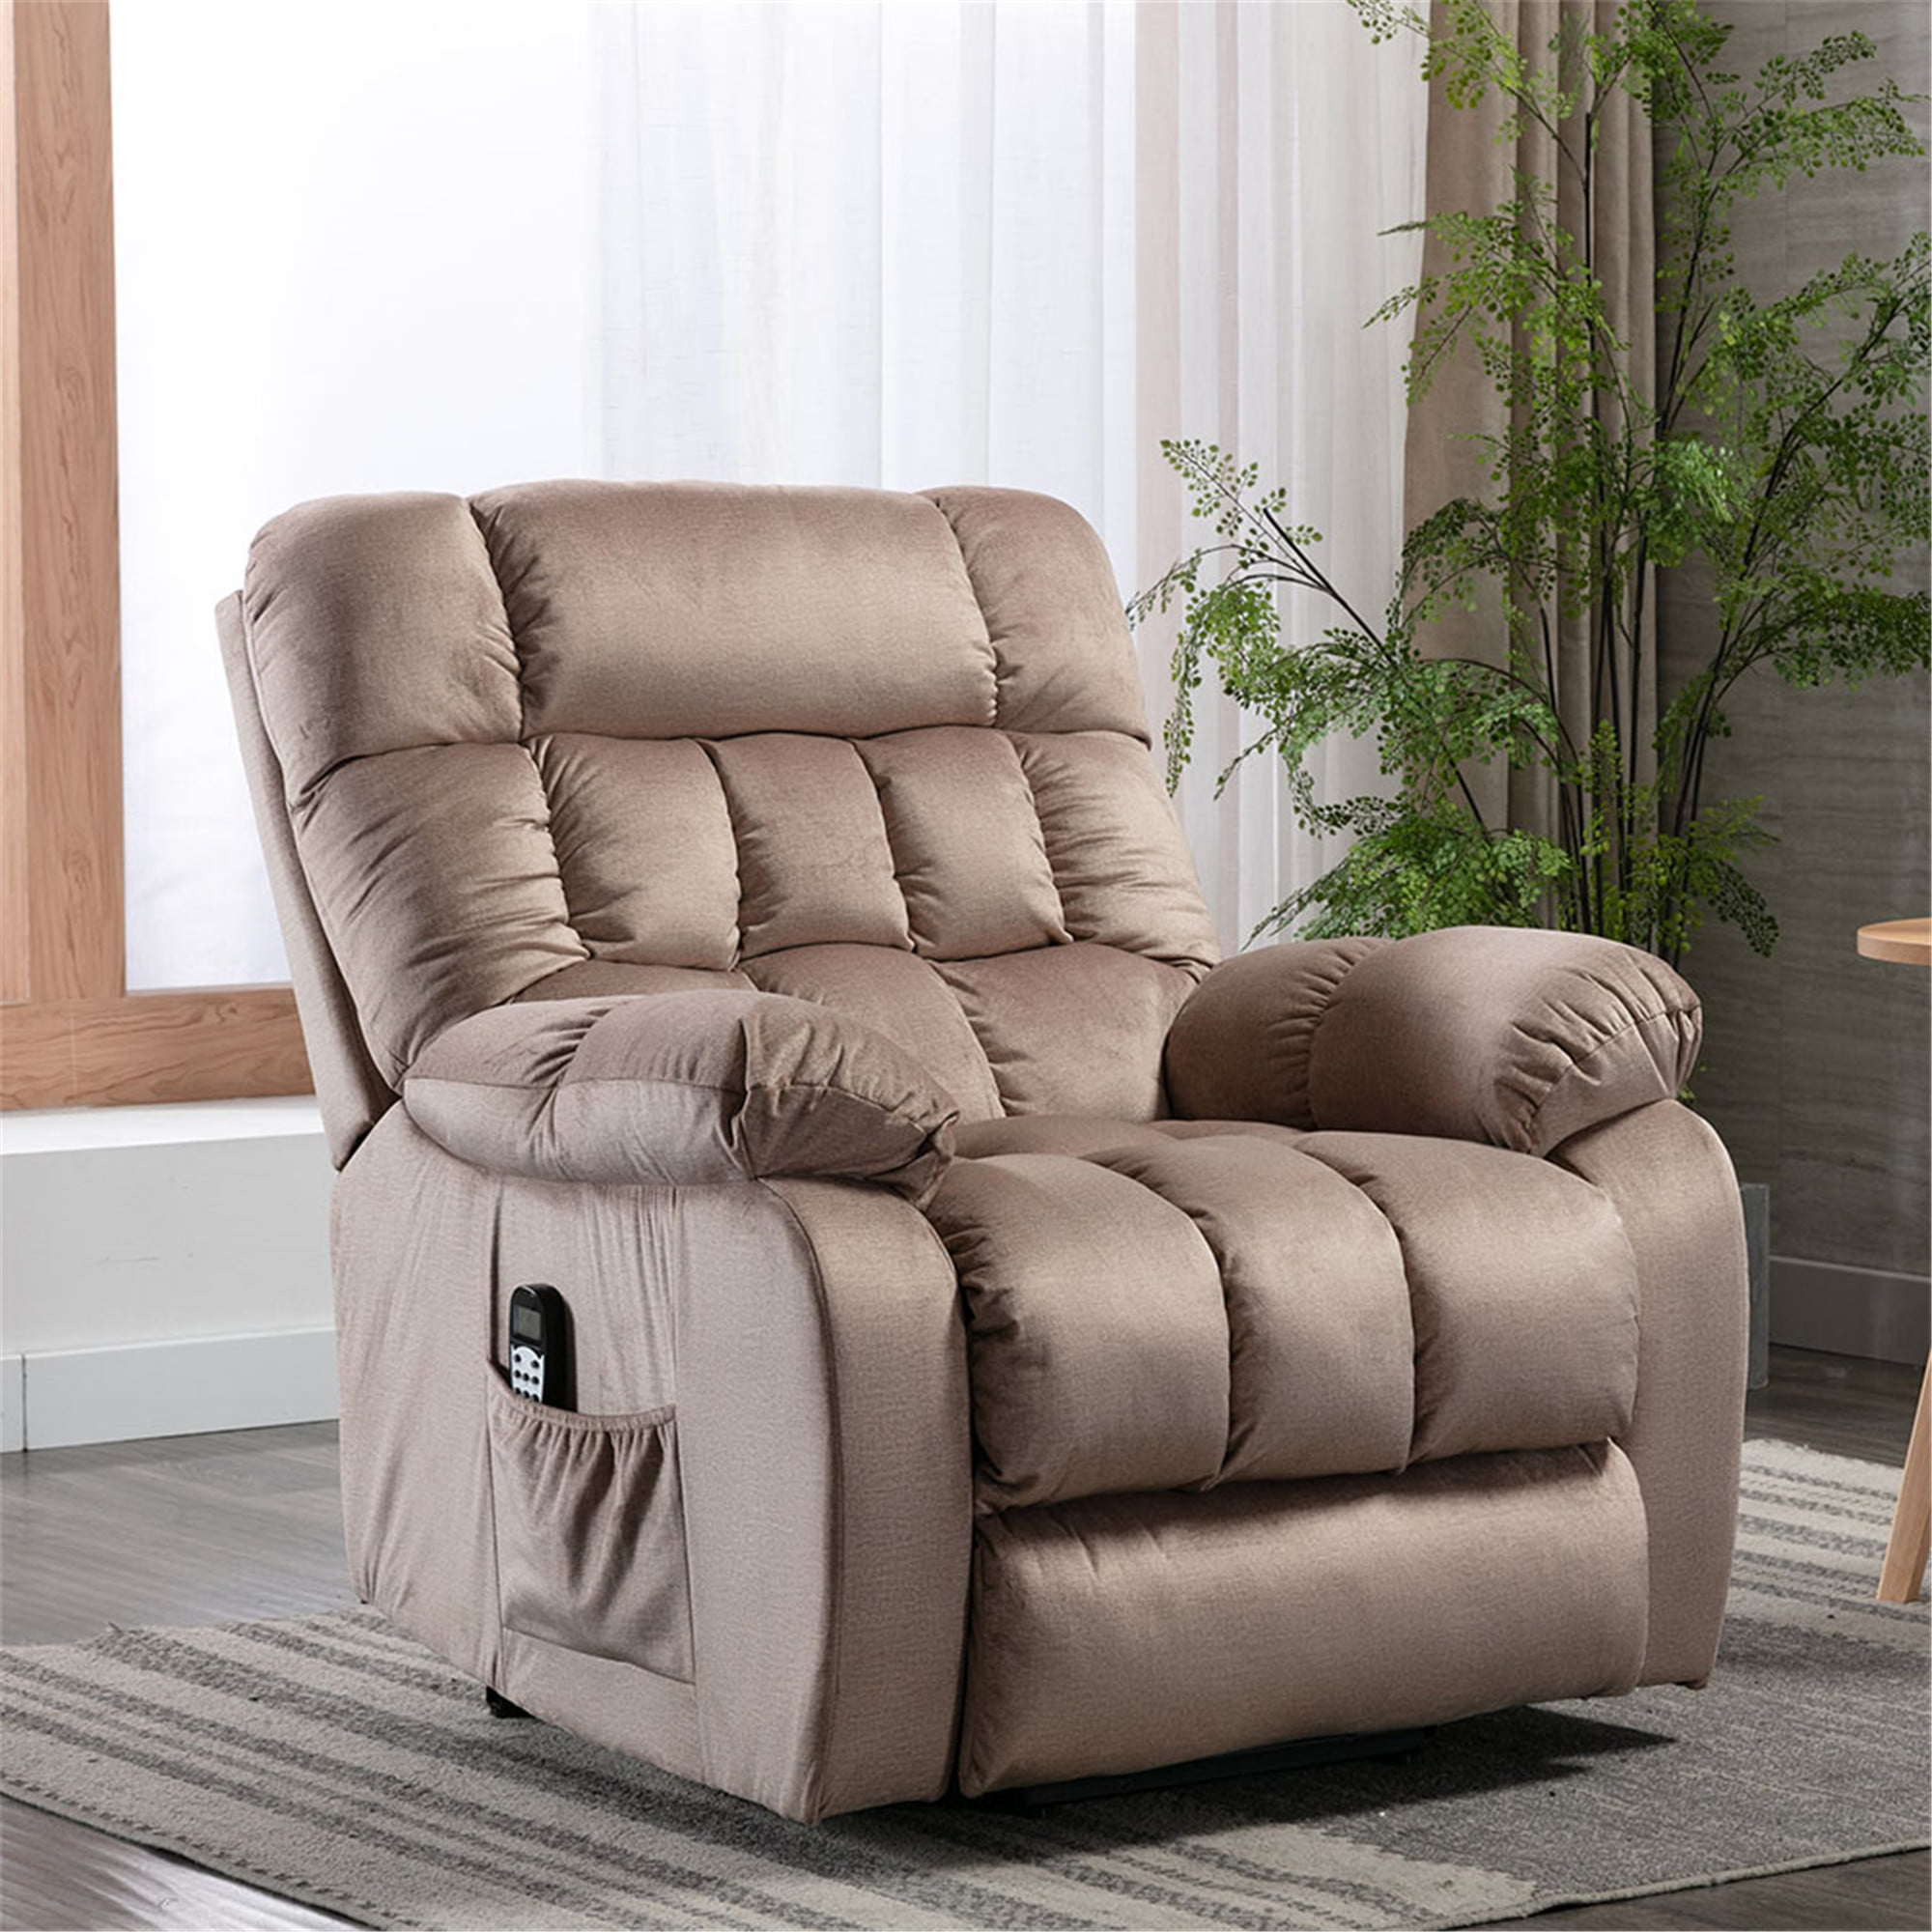 Irene Inevent Electric Lift Recliner Heated Massage Chair